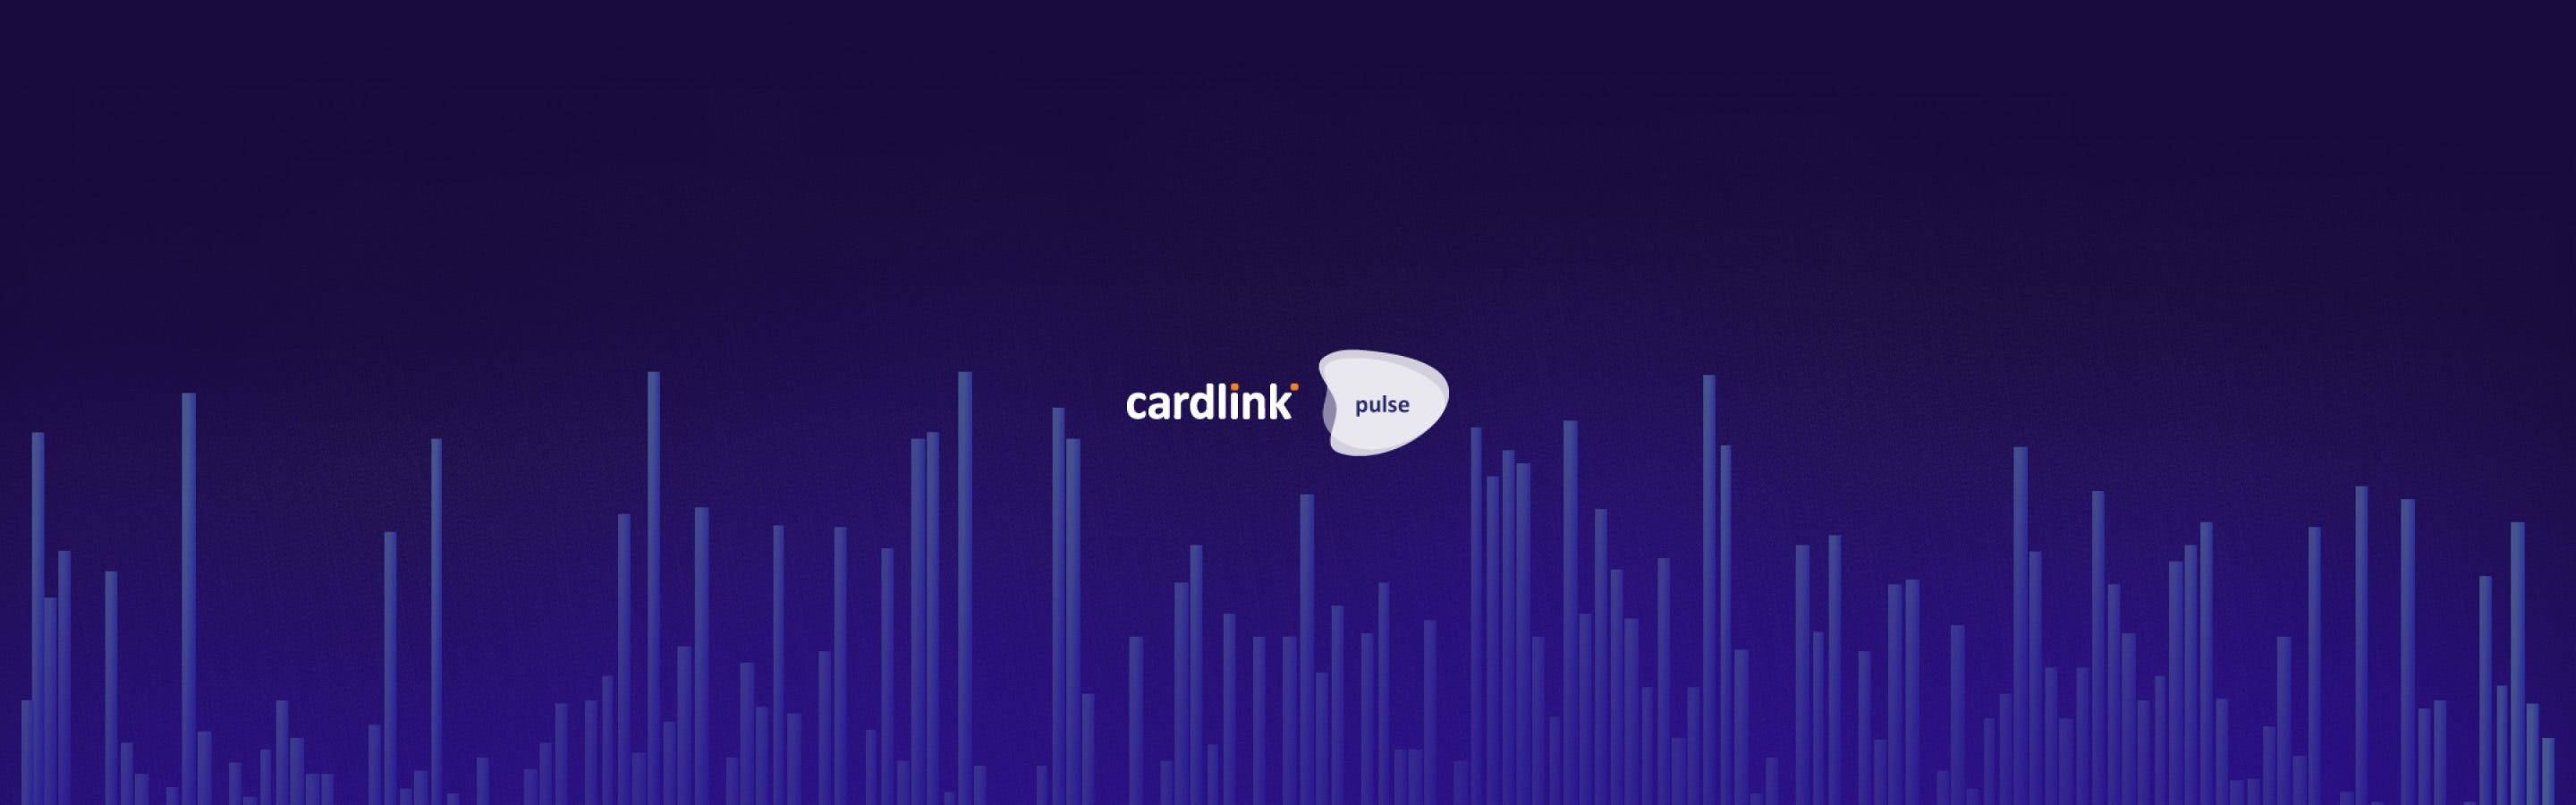 Made by Quintessential - Cardlink pulse cover image